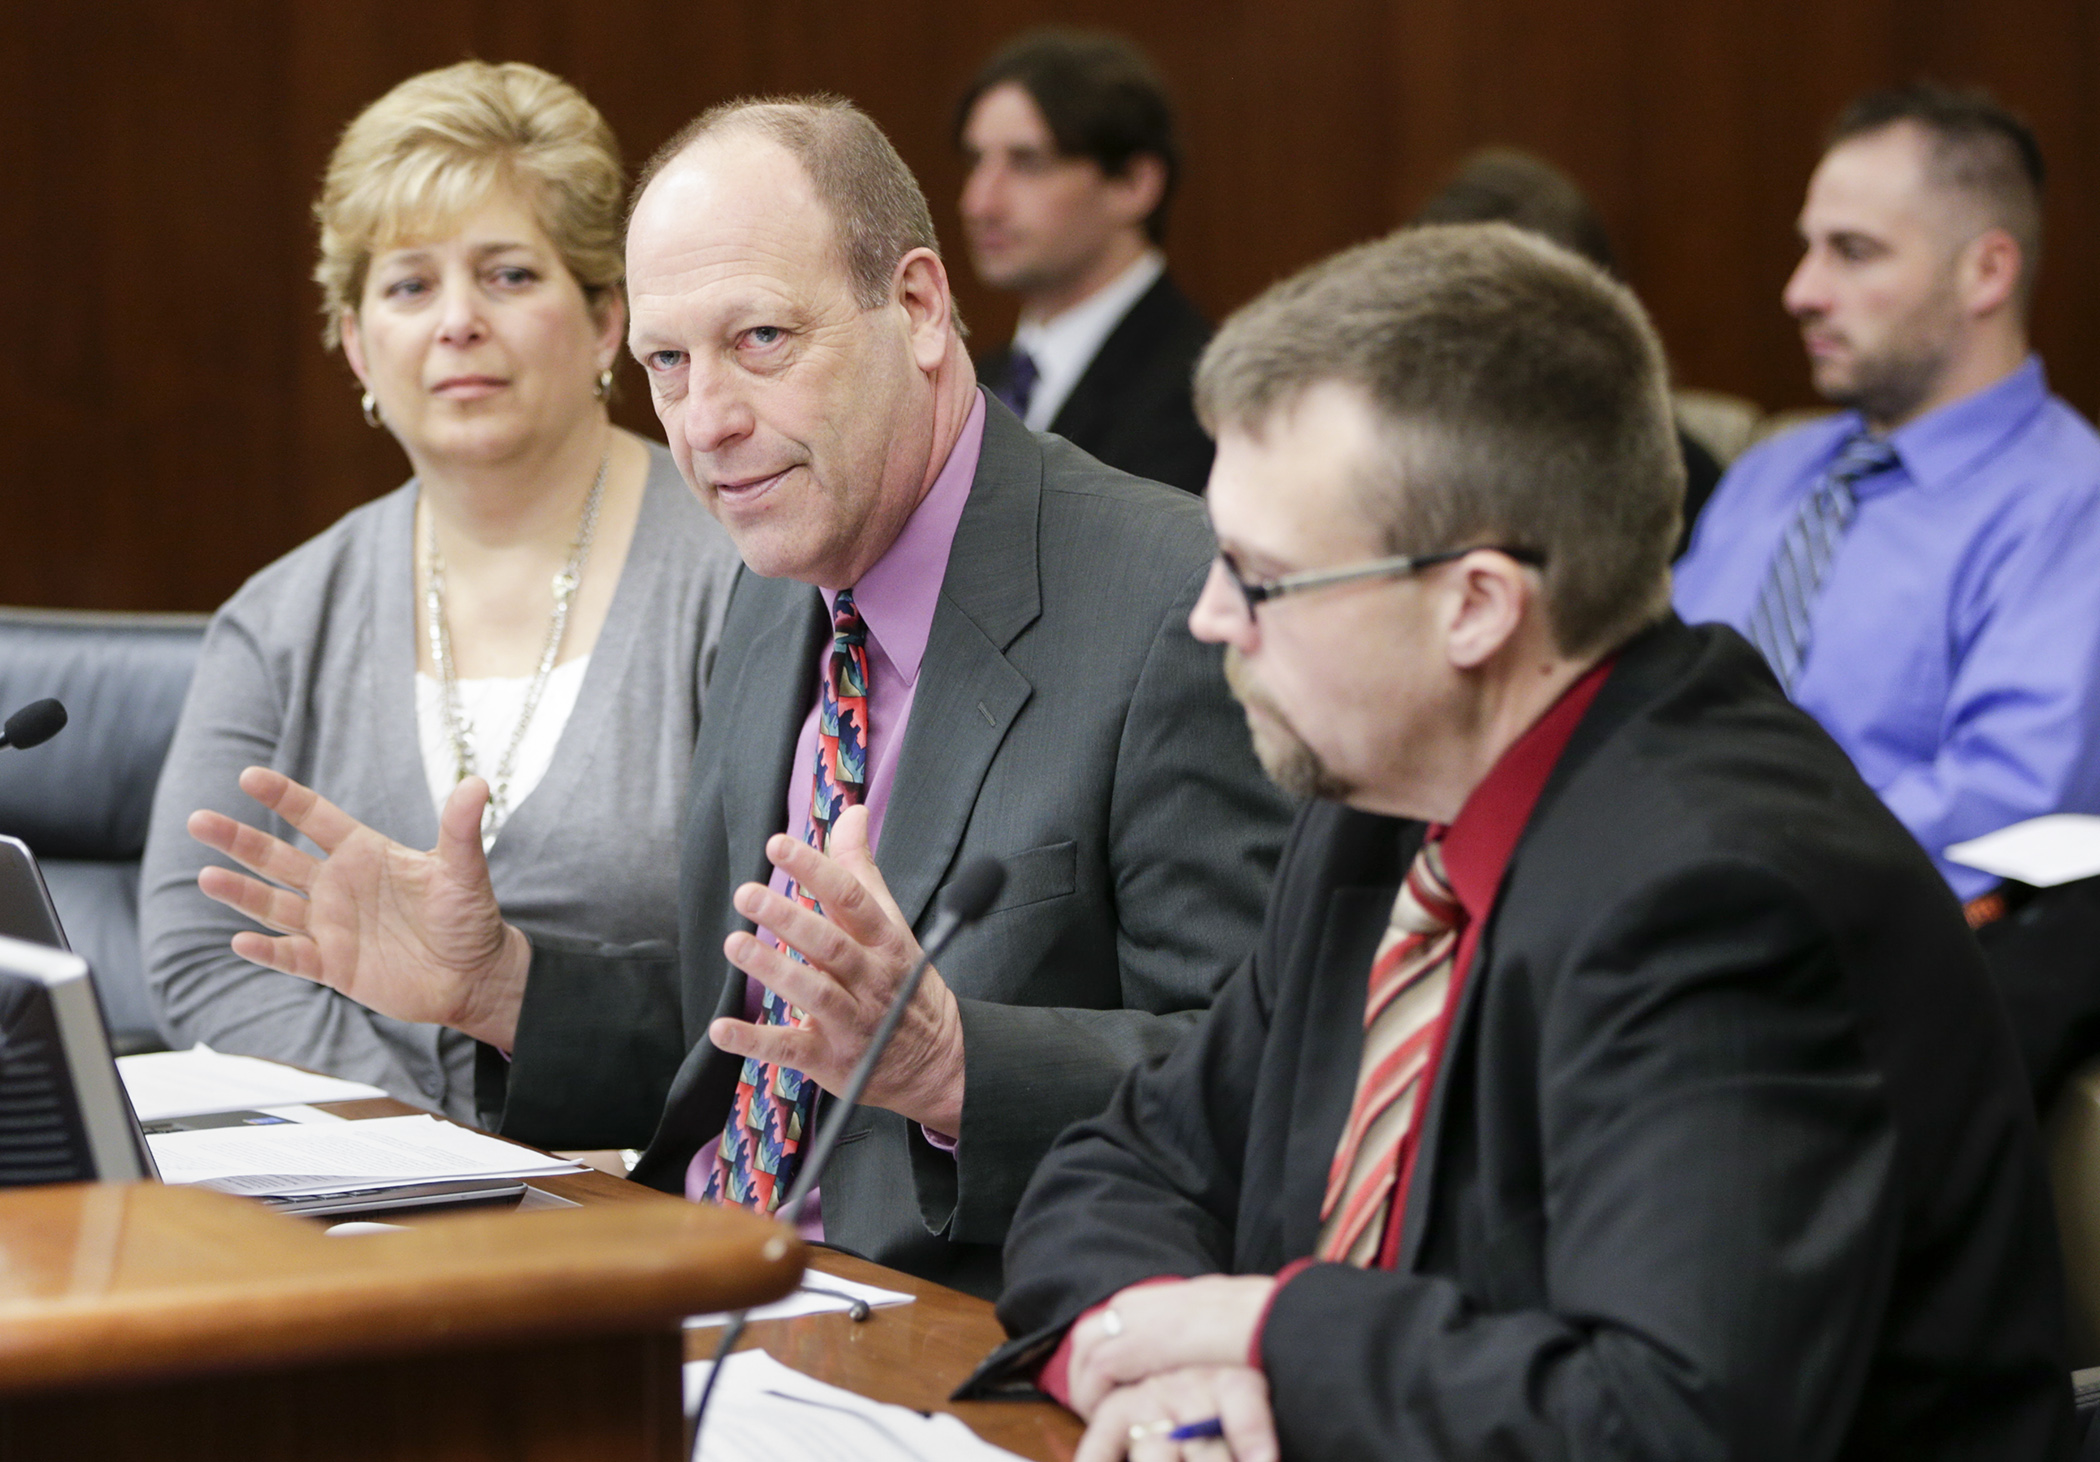 Stephen Jones, superintendent of Little Falls schools and co-chair of the Career and Technical Educator Licensing Advisory Task Force, responds to a question during the Feb. 2 meeting of the House Education Innovation and Policy Committee. With him are Paula Palmer, the Education Department’s director of career and college success, and Troy Haugen, task force co-chair and CTE coordinator for the Lakes County Service Cooperative. Photo by Paul Battaglia